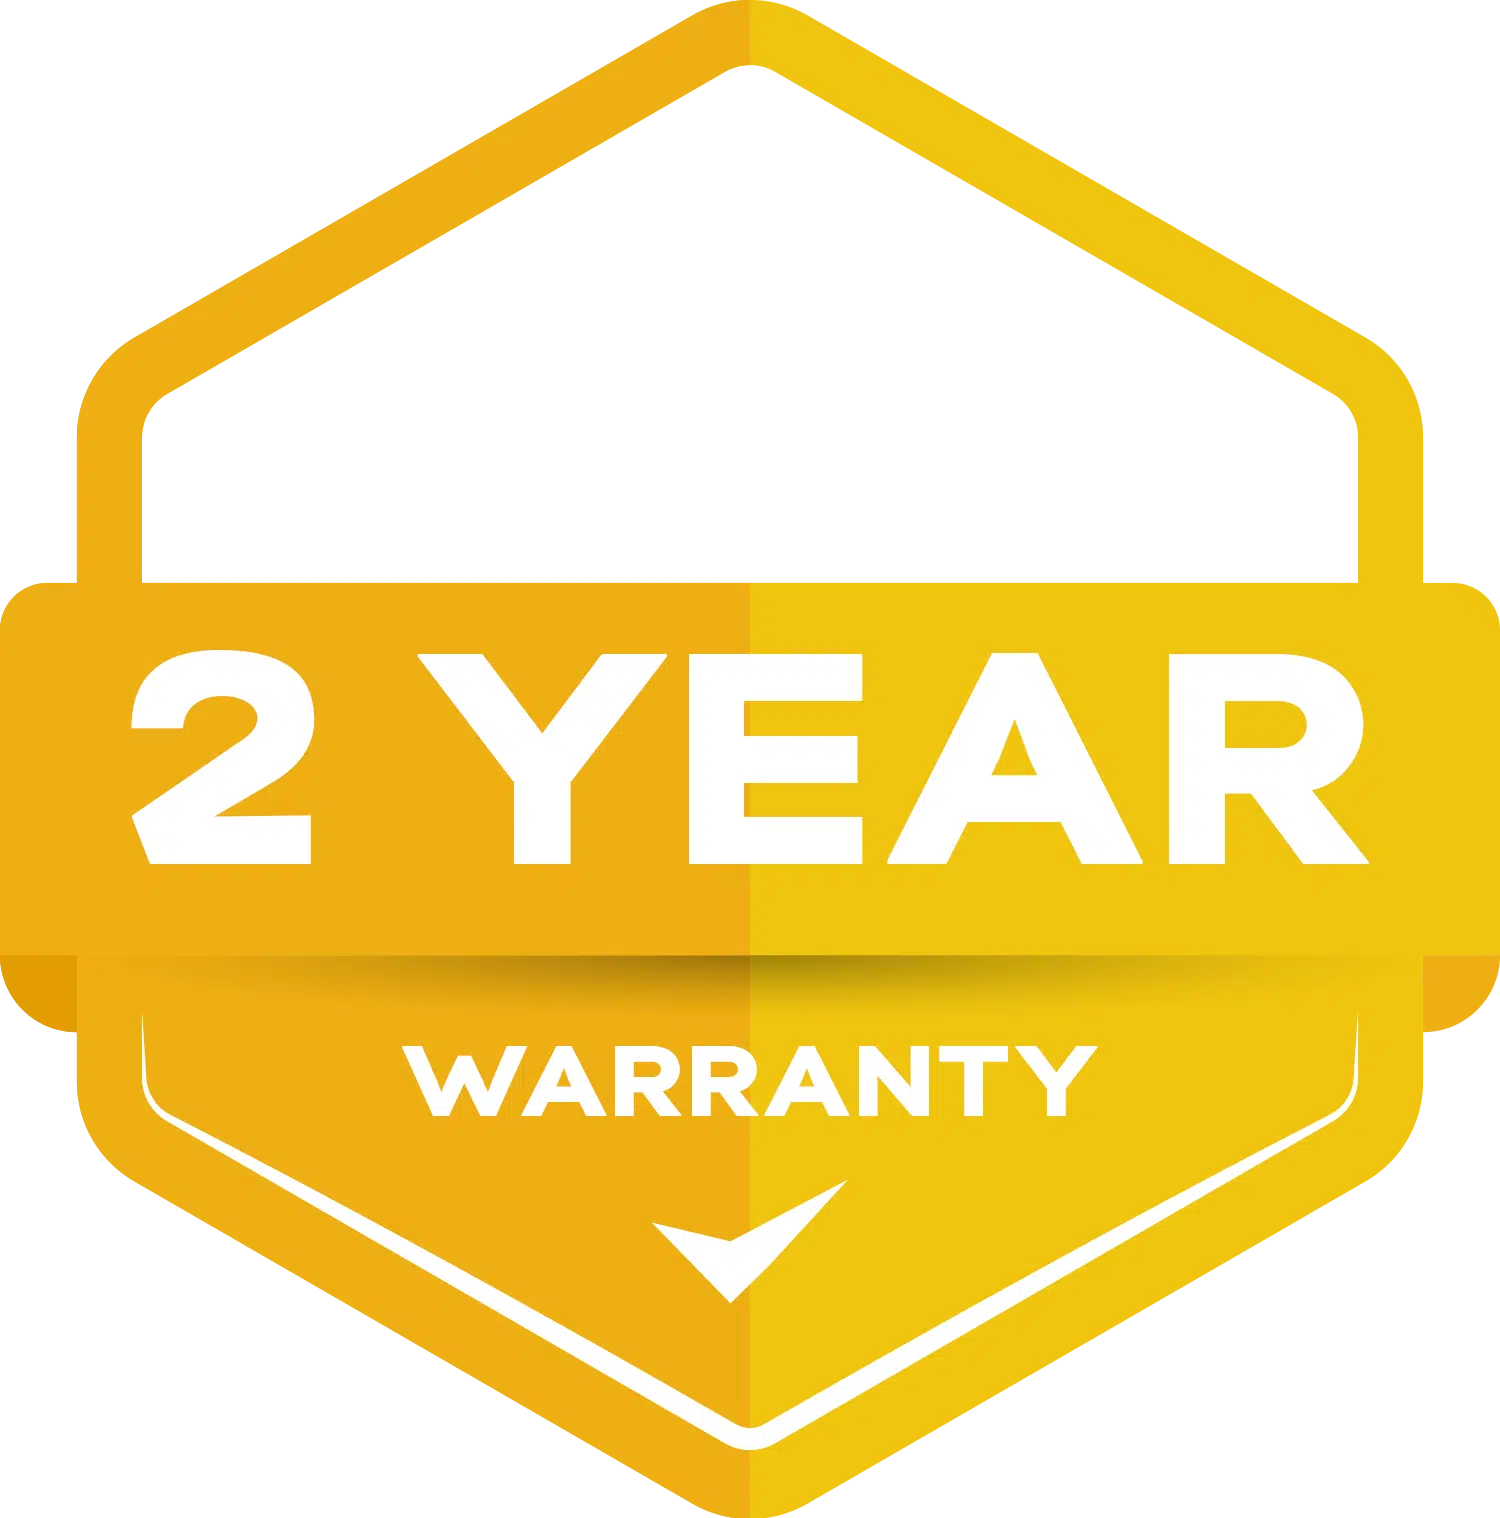 Extended Warranty 2 Year – P2000